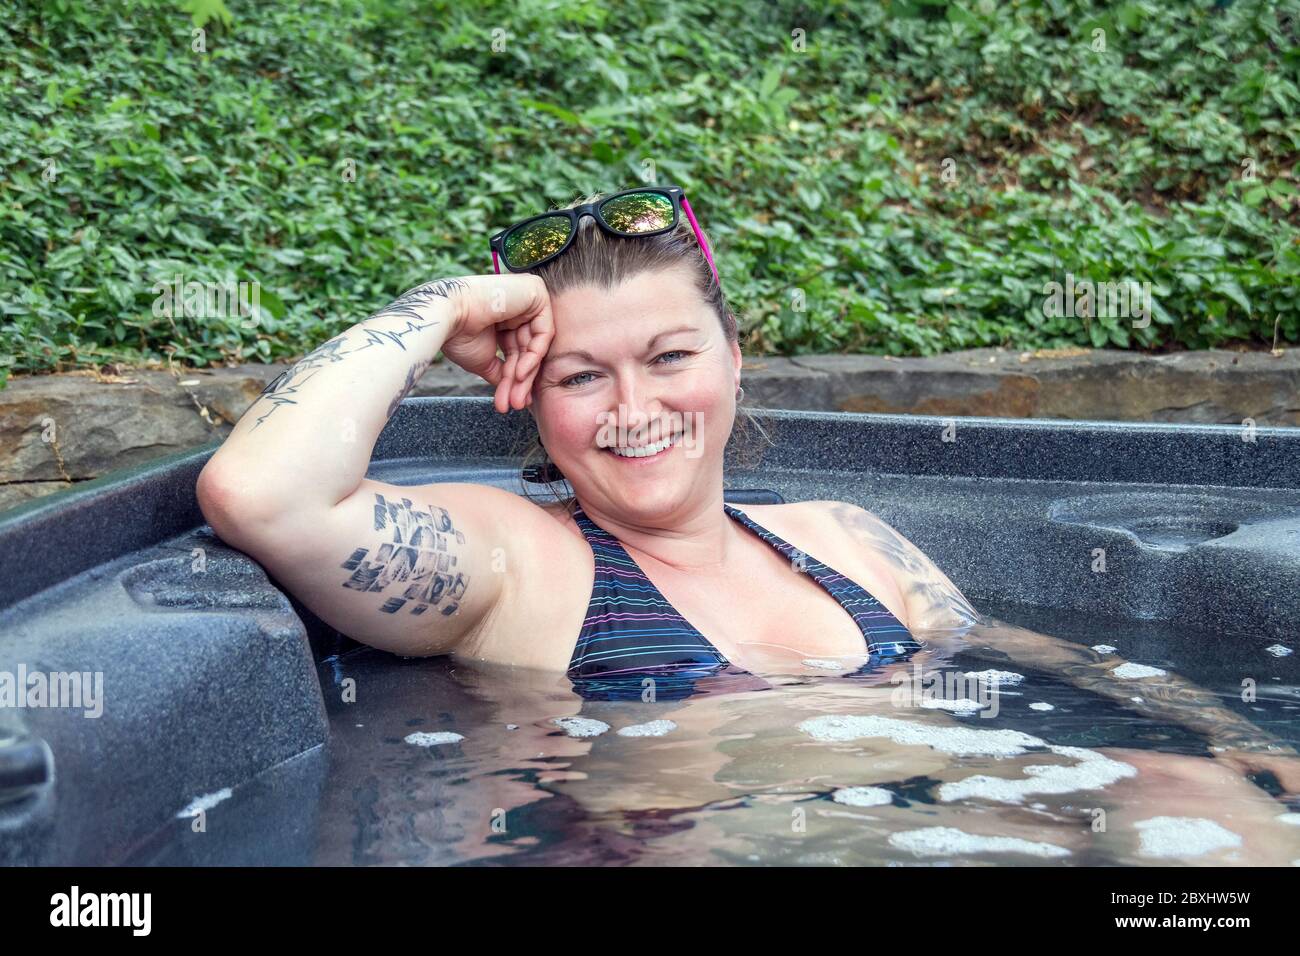 caucasian woman relaxing in a hot tub outdoor Stock Photo